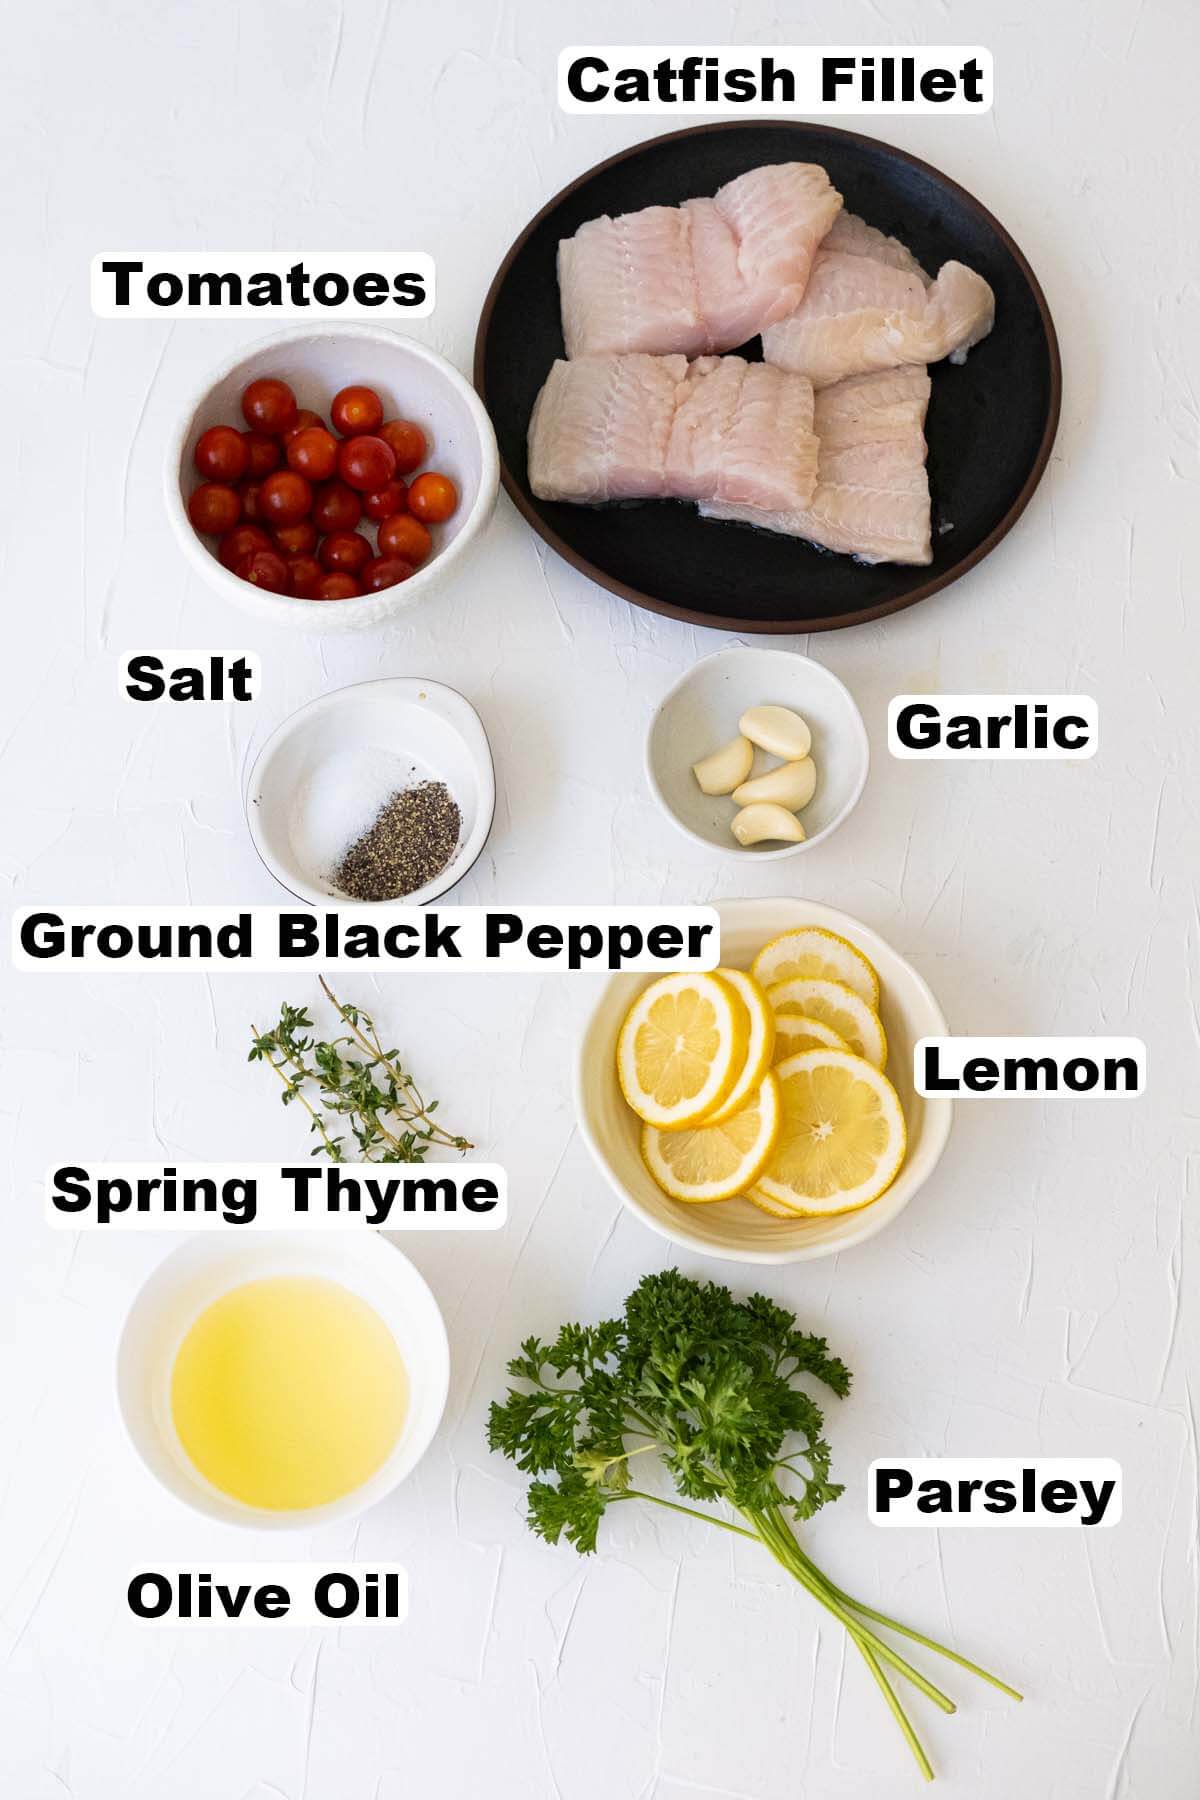 Ingredients for baked catfish recipe.